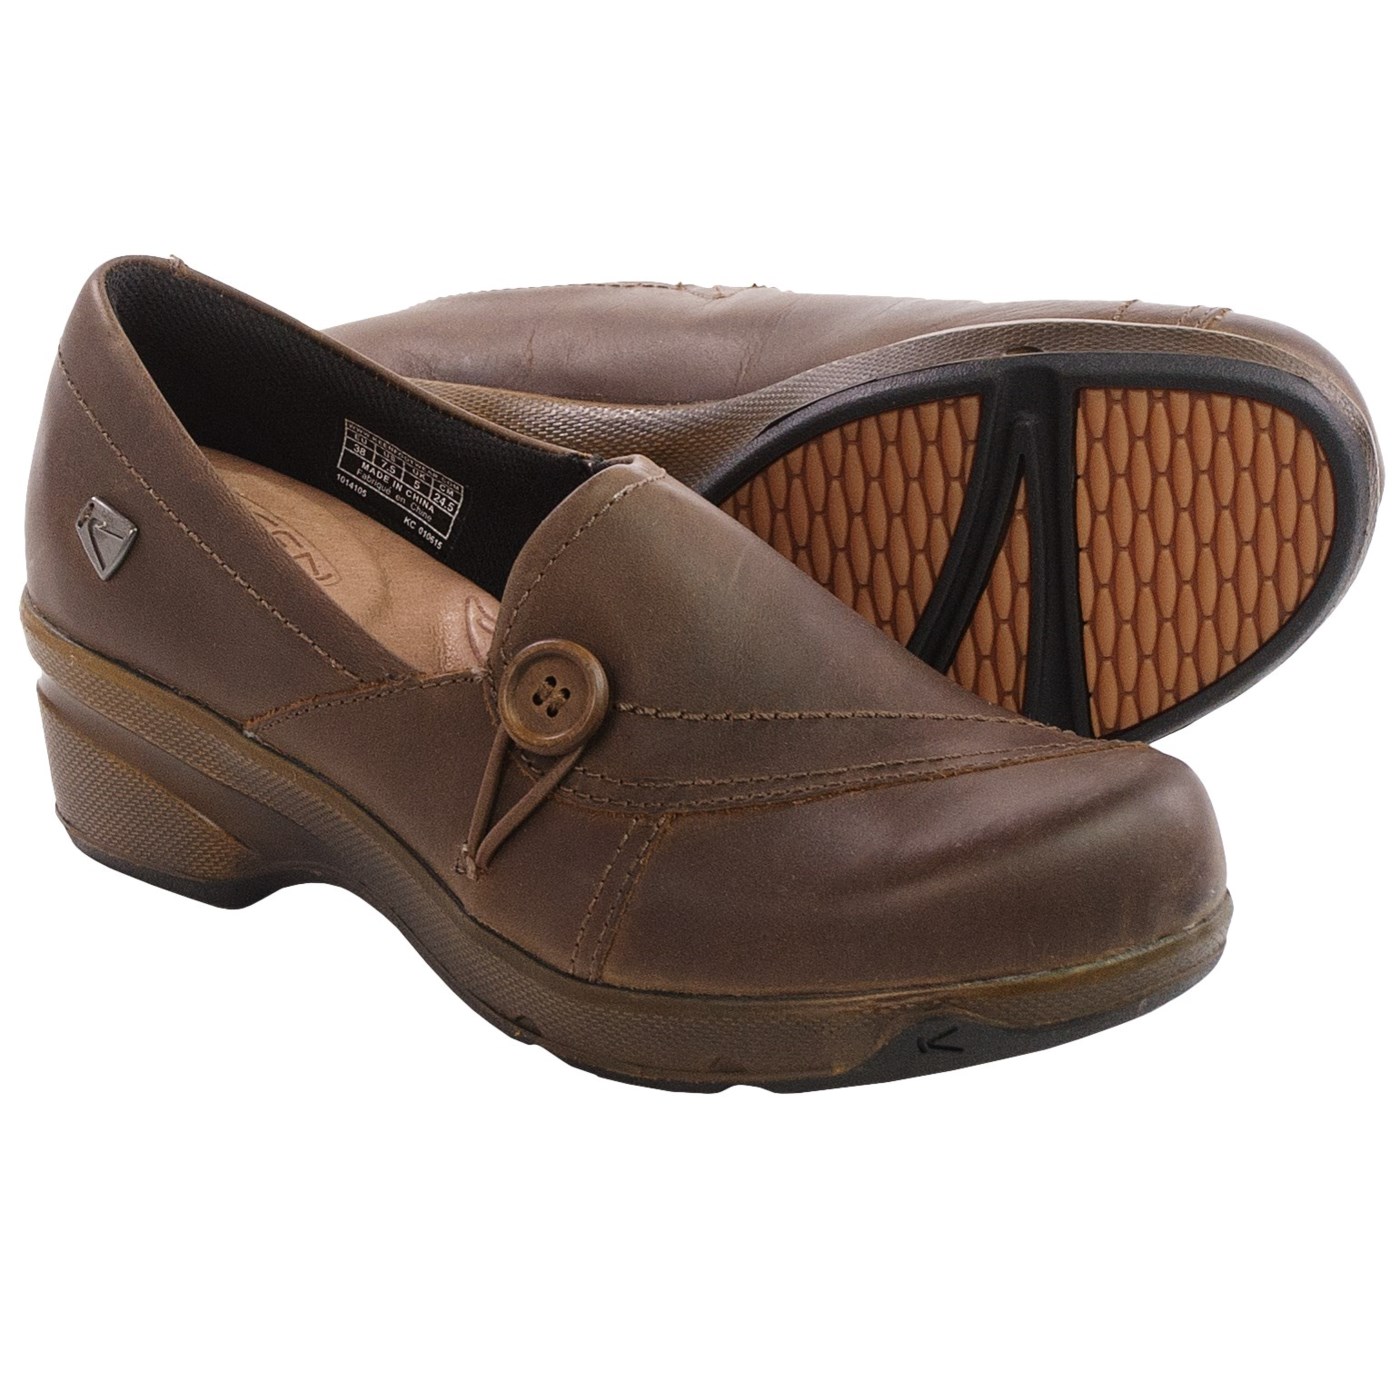 Comfy   Review of Keen Mora Button Shoes   Leather, Slip Ons (For Women) by HikerMom on 5/2/2016